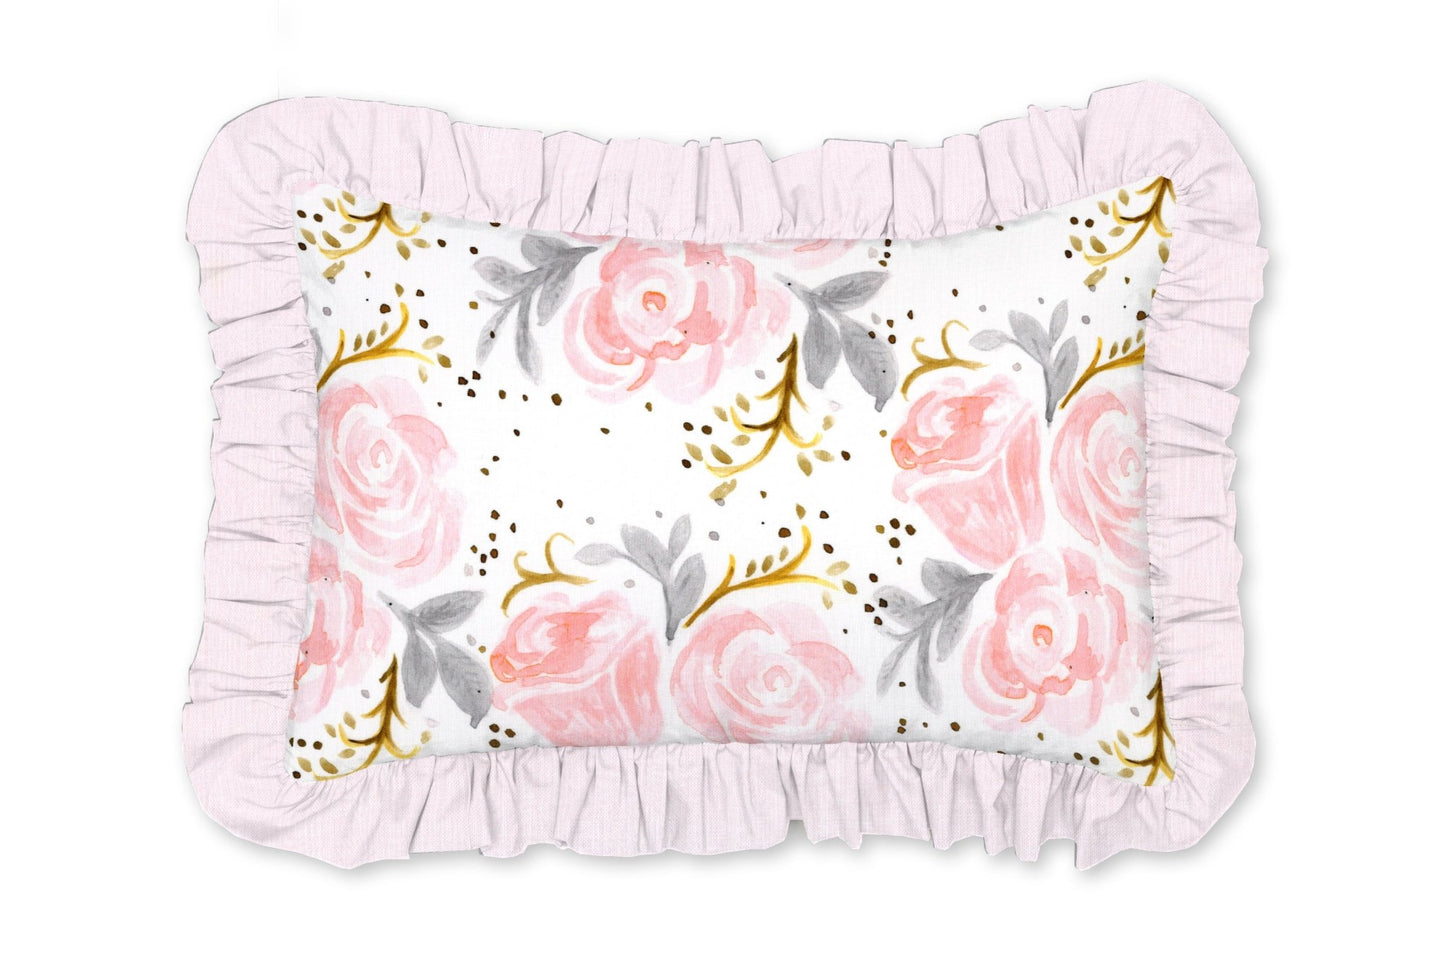 Pink and Gray Rose Decorative Pillow - New Arrivals Inc